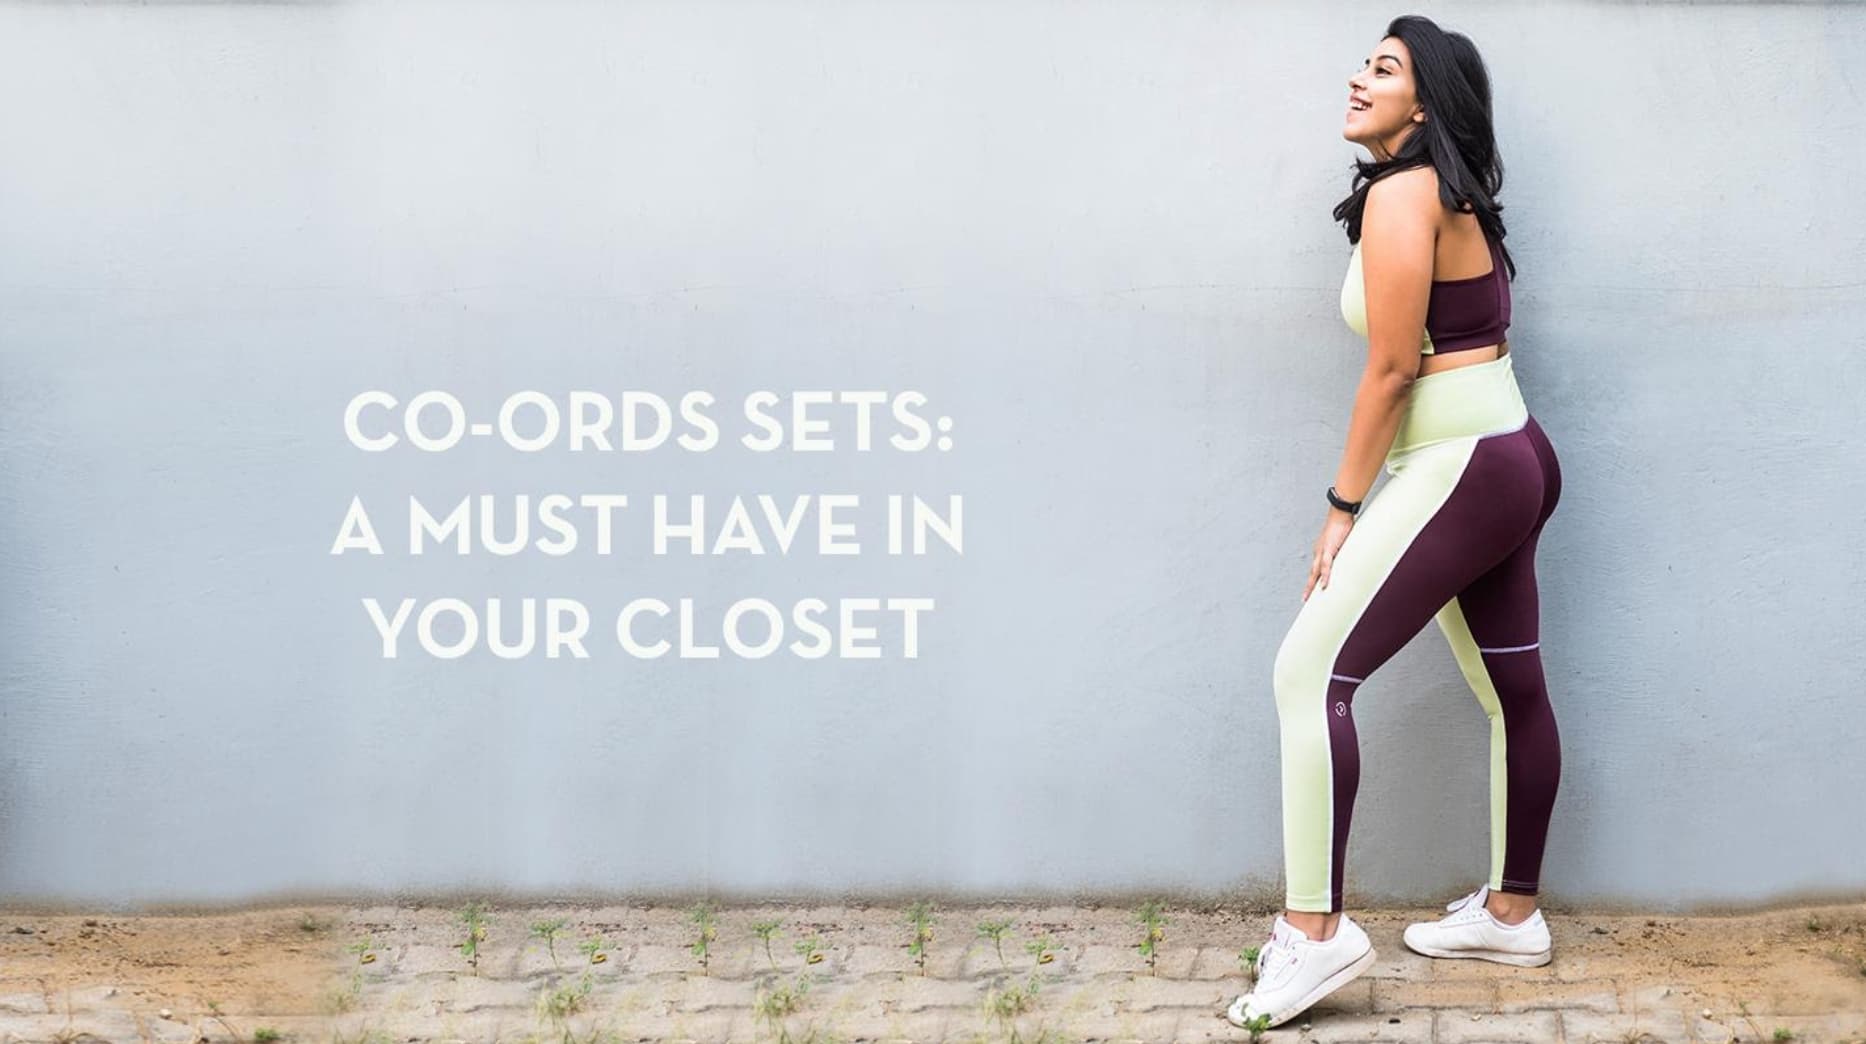 A Complete Guide to Choosing the Perfect Co-ord Sets for Women